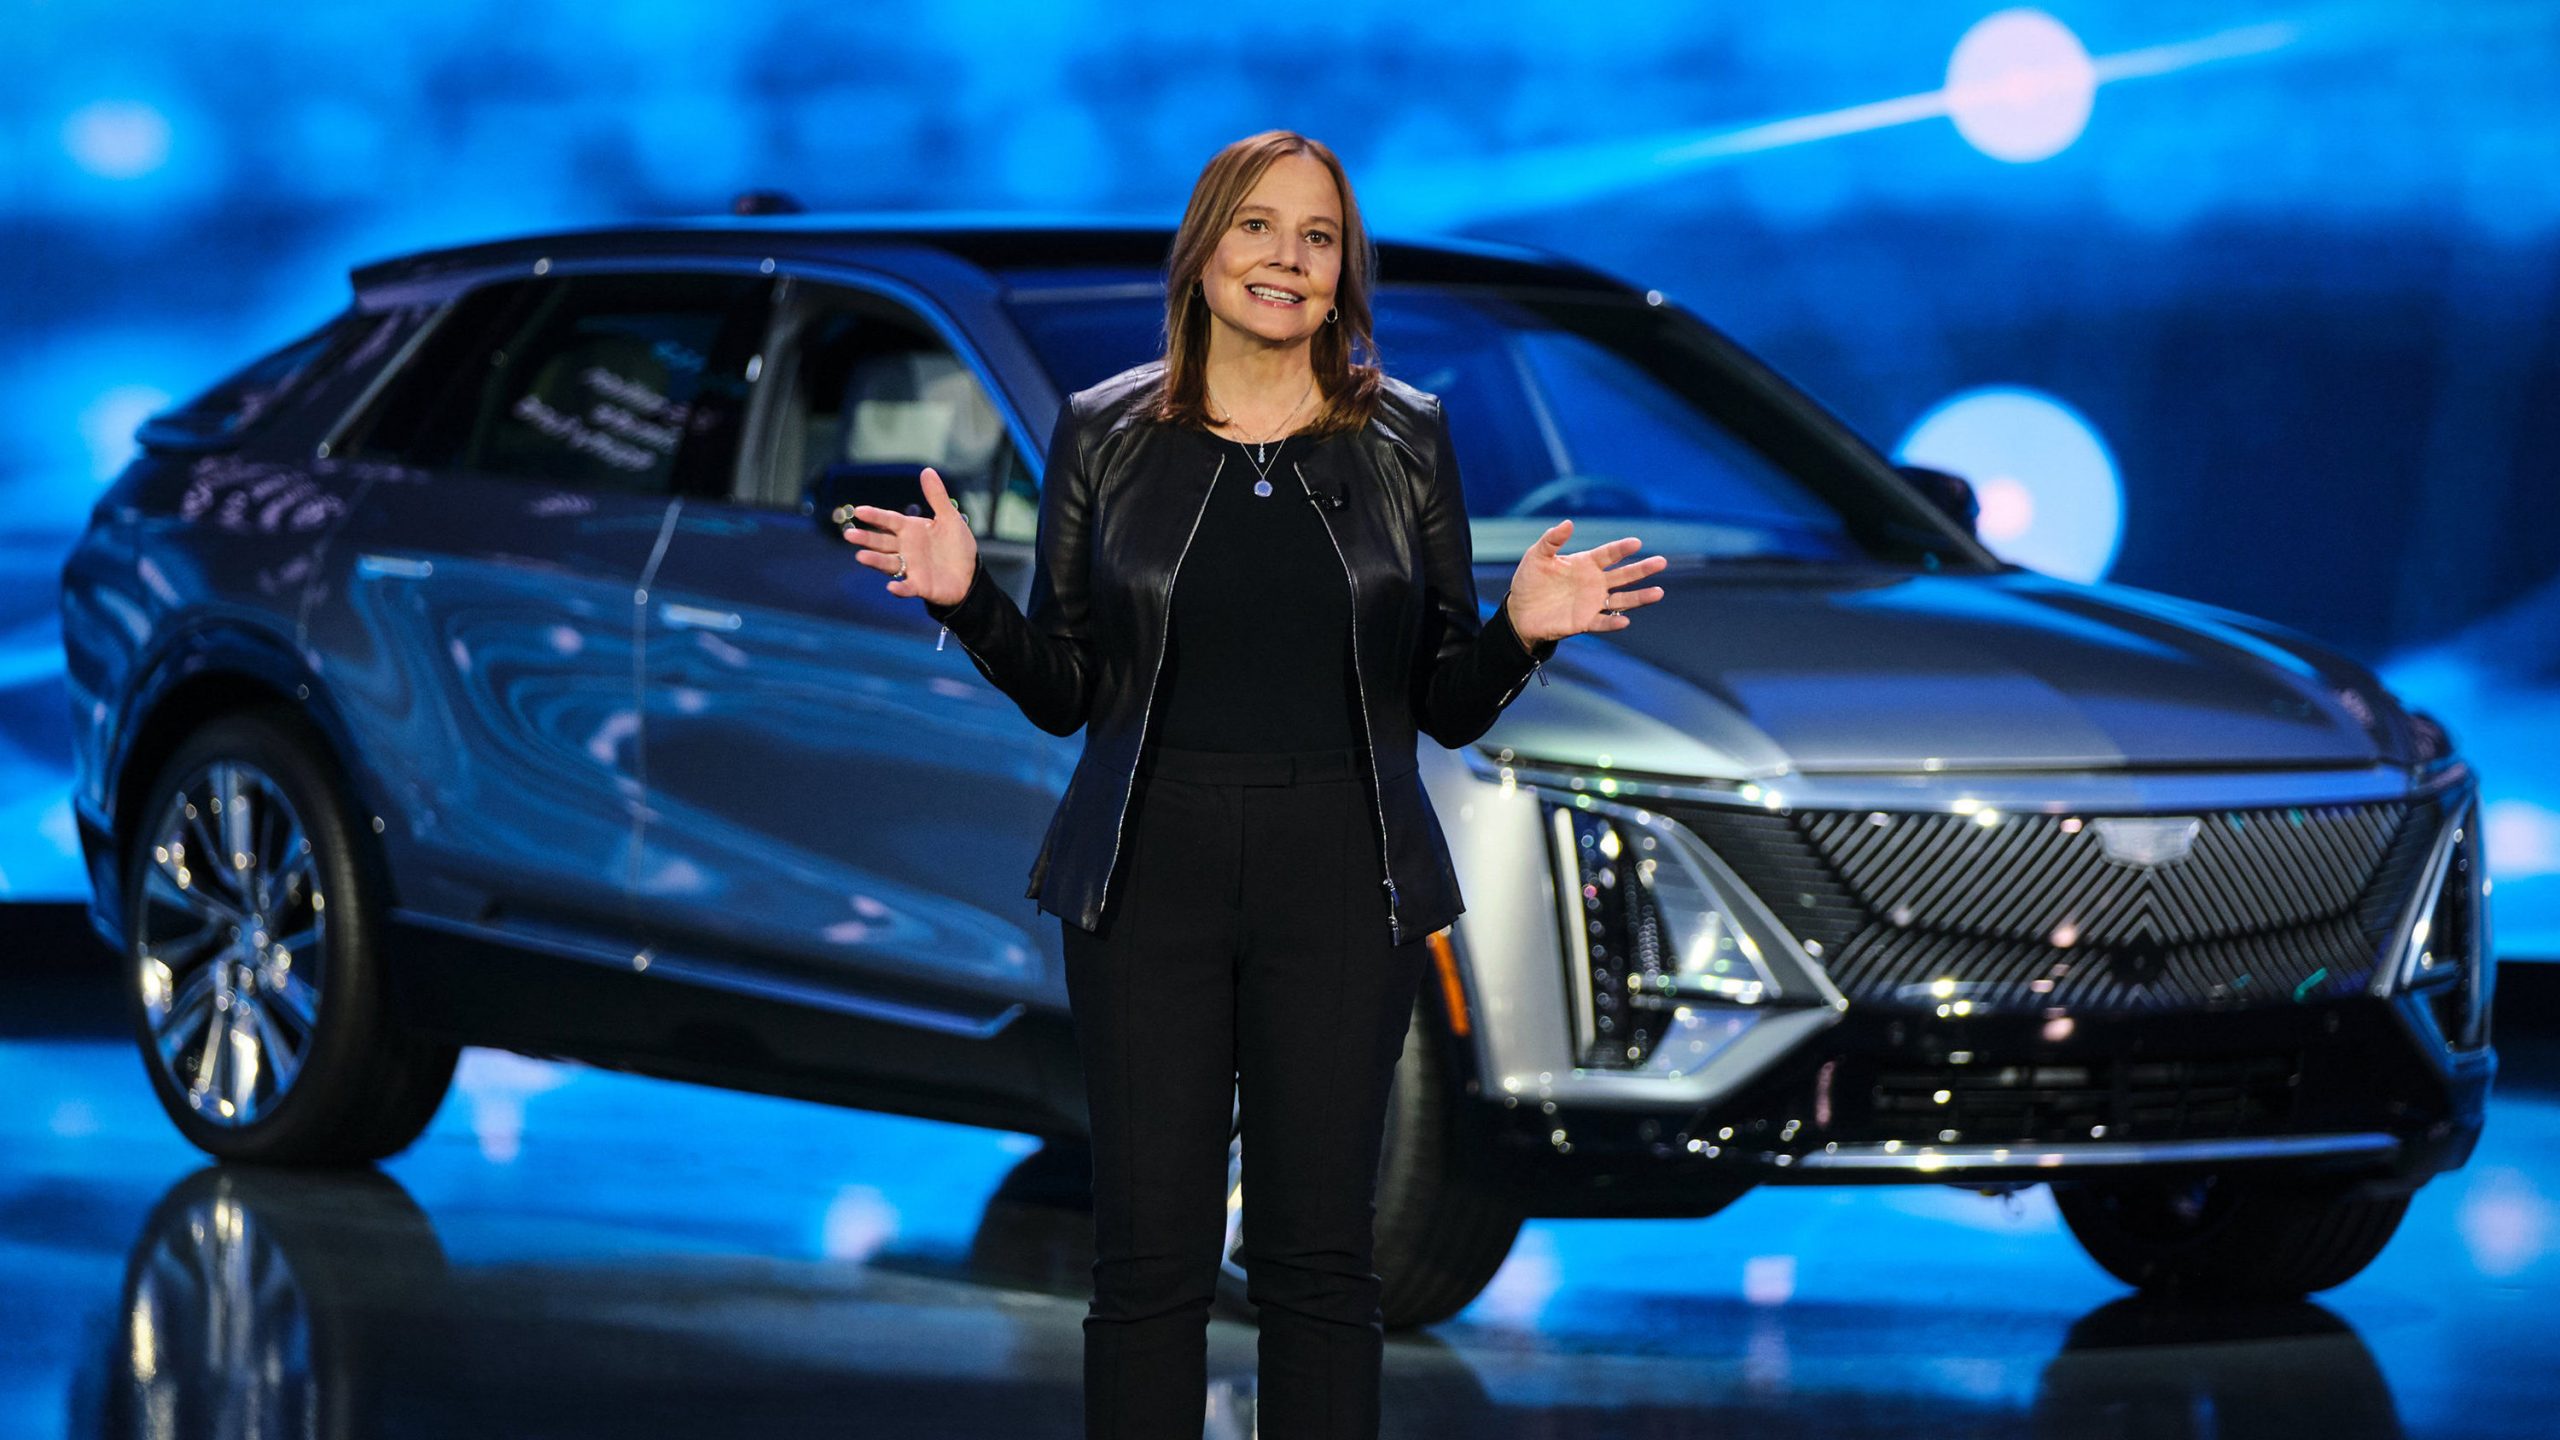 CES 2022: General Motors teases self-driven car launch by mid-decade